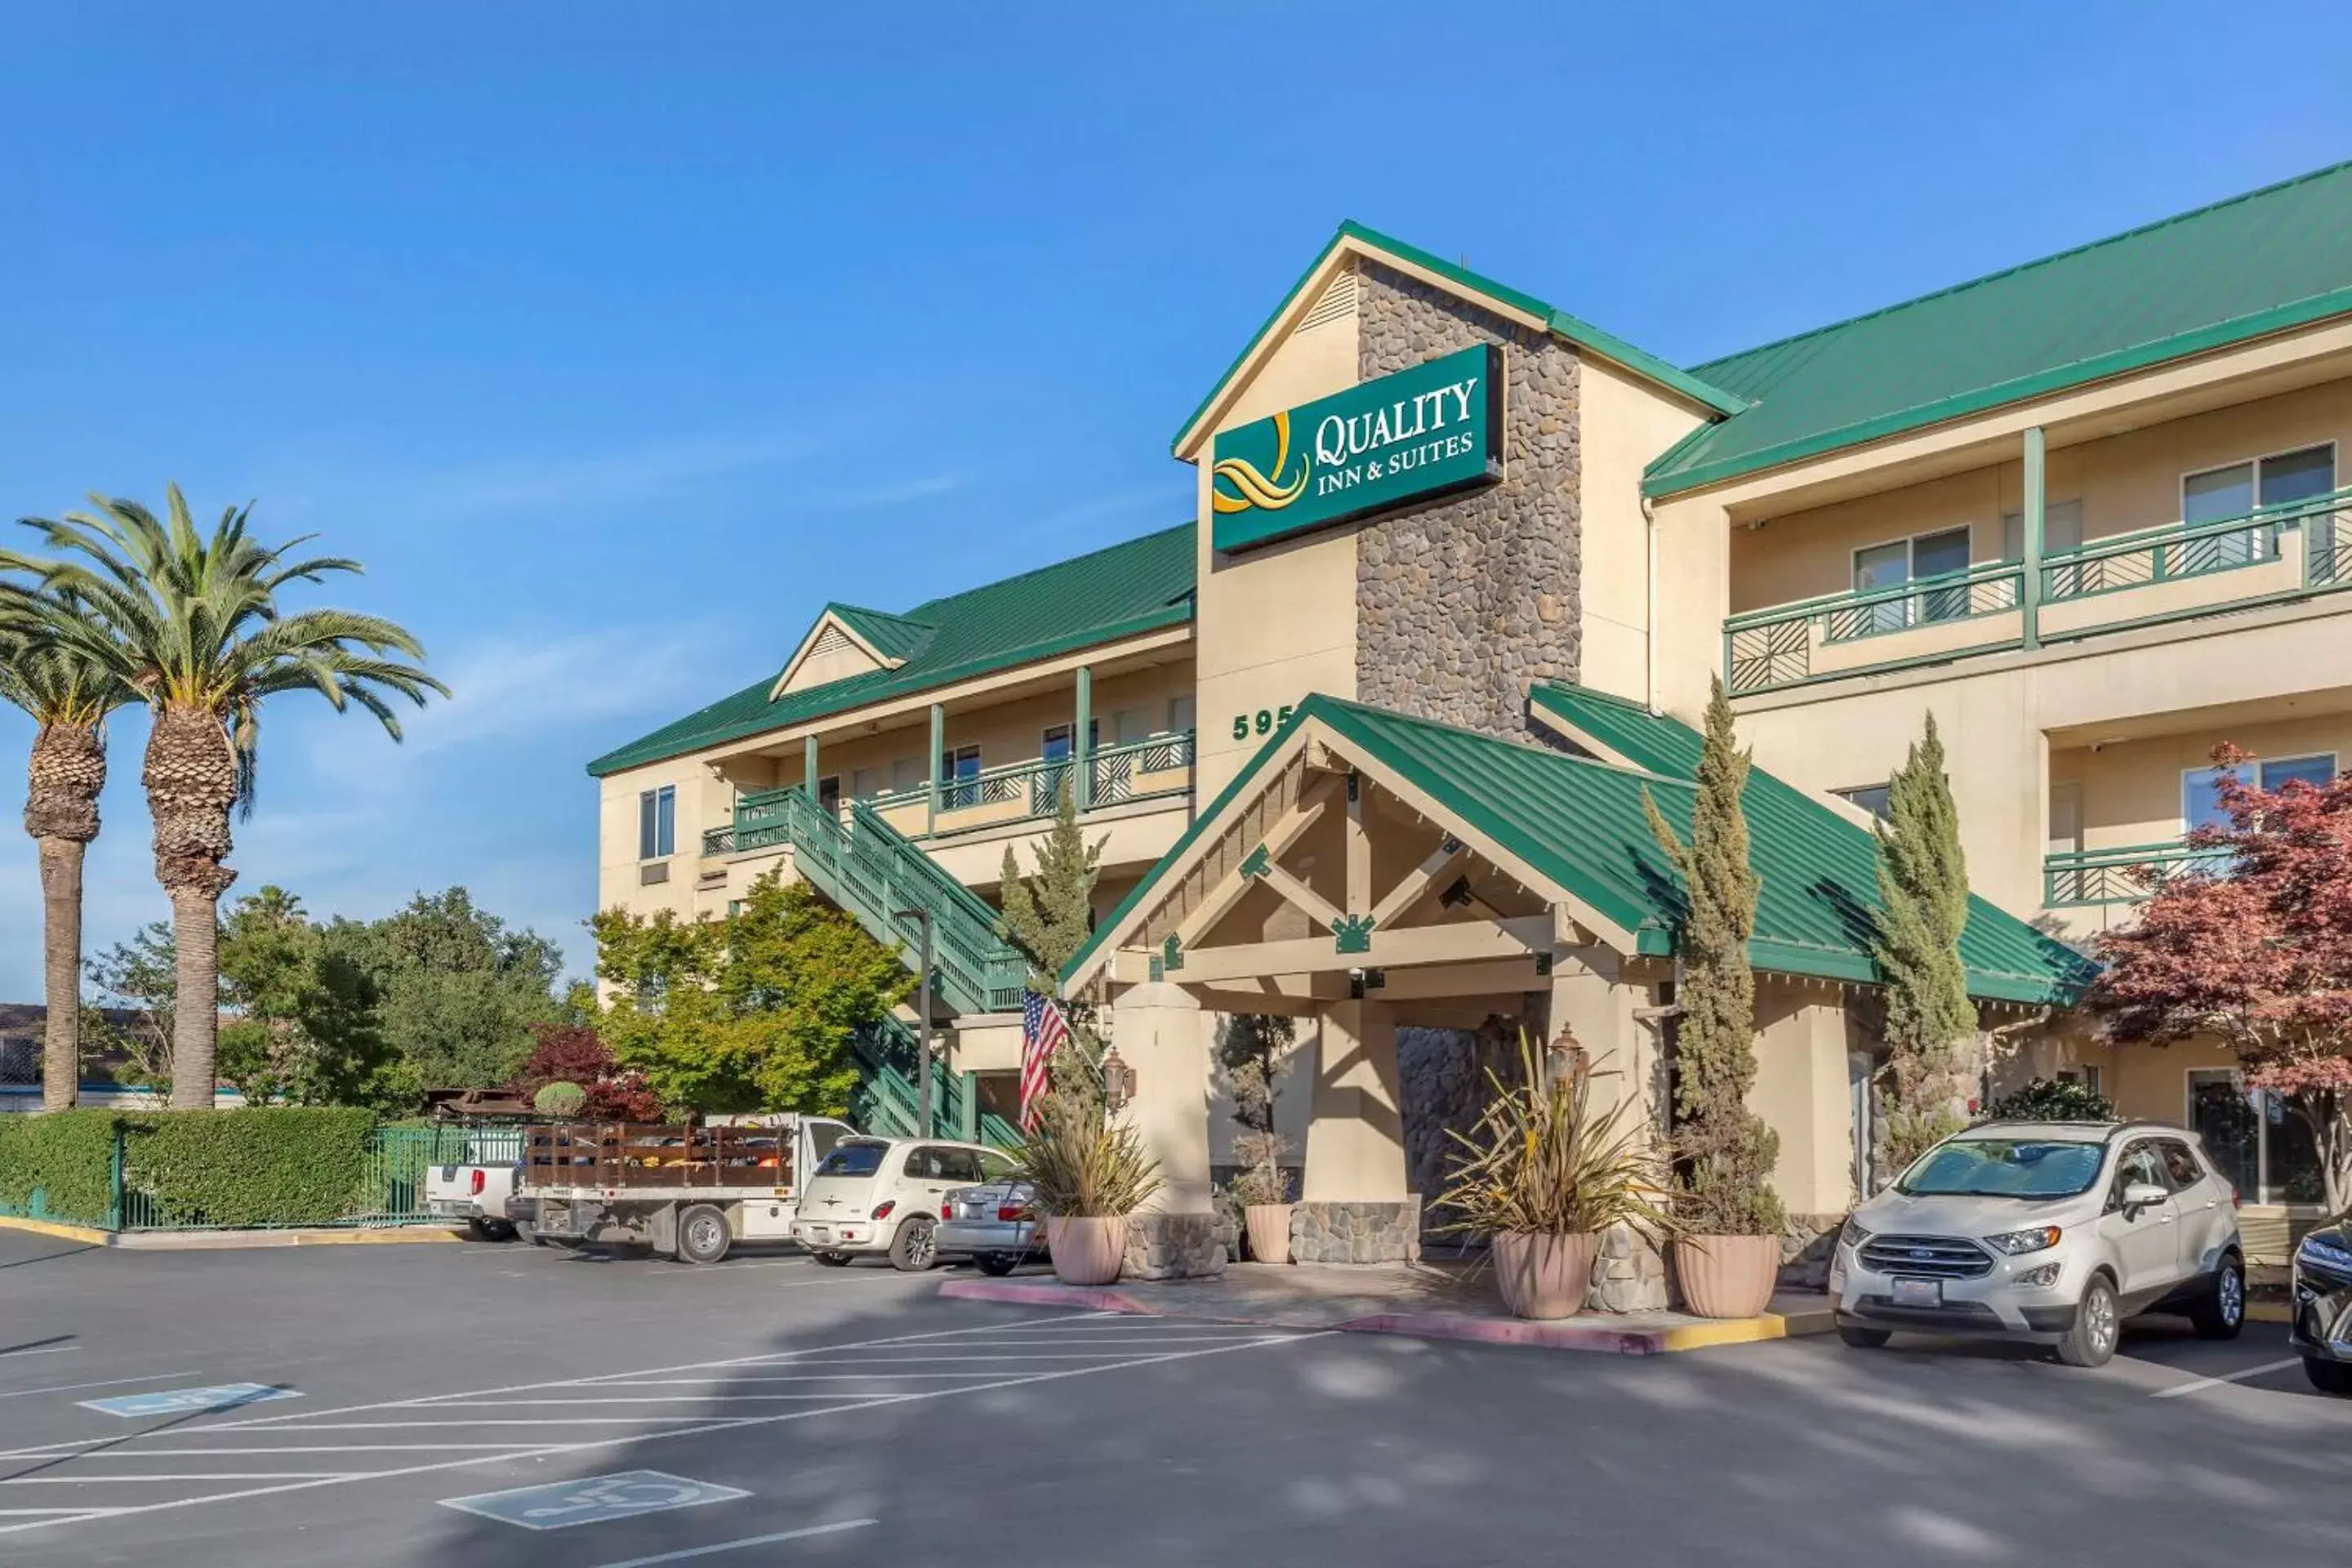 Property Building in Quality Inn & Suites Livermore